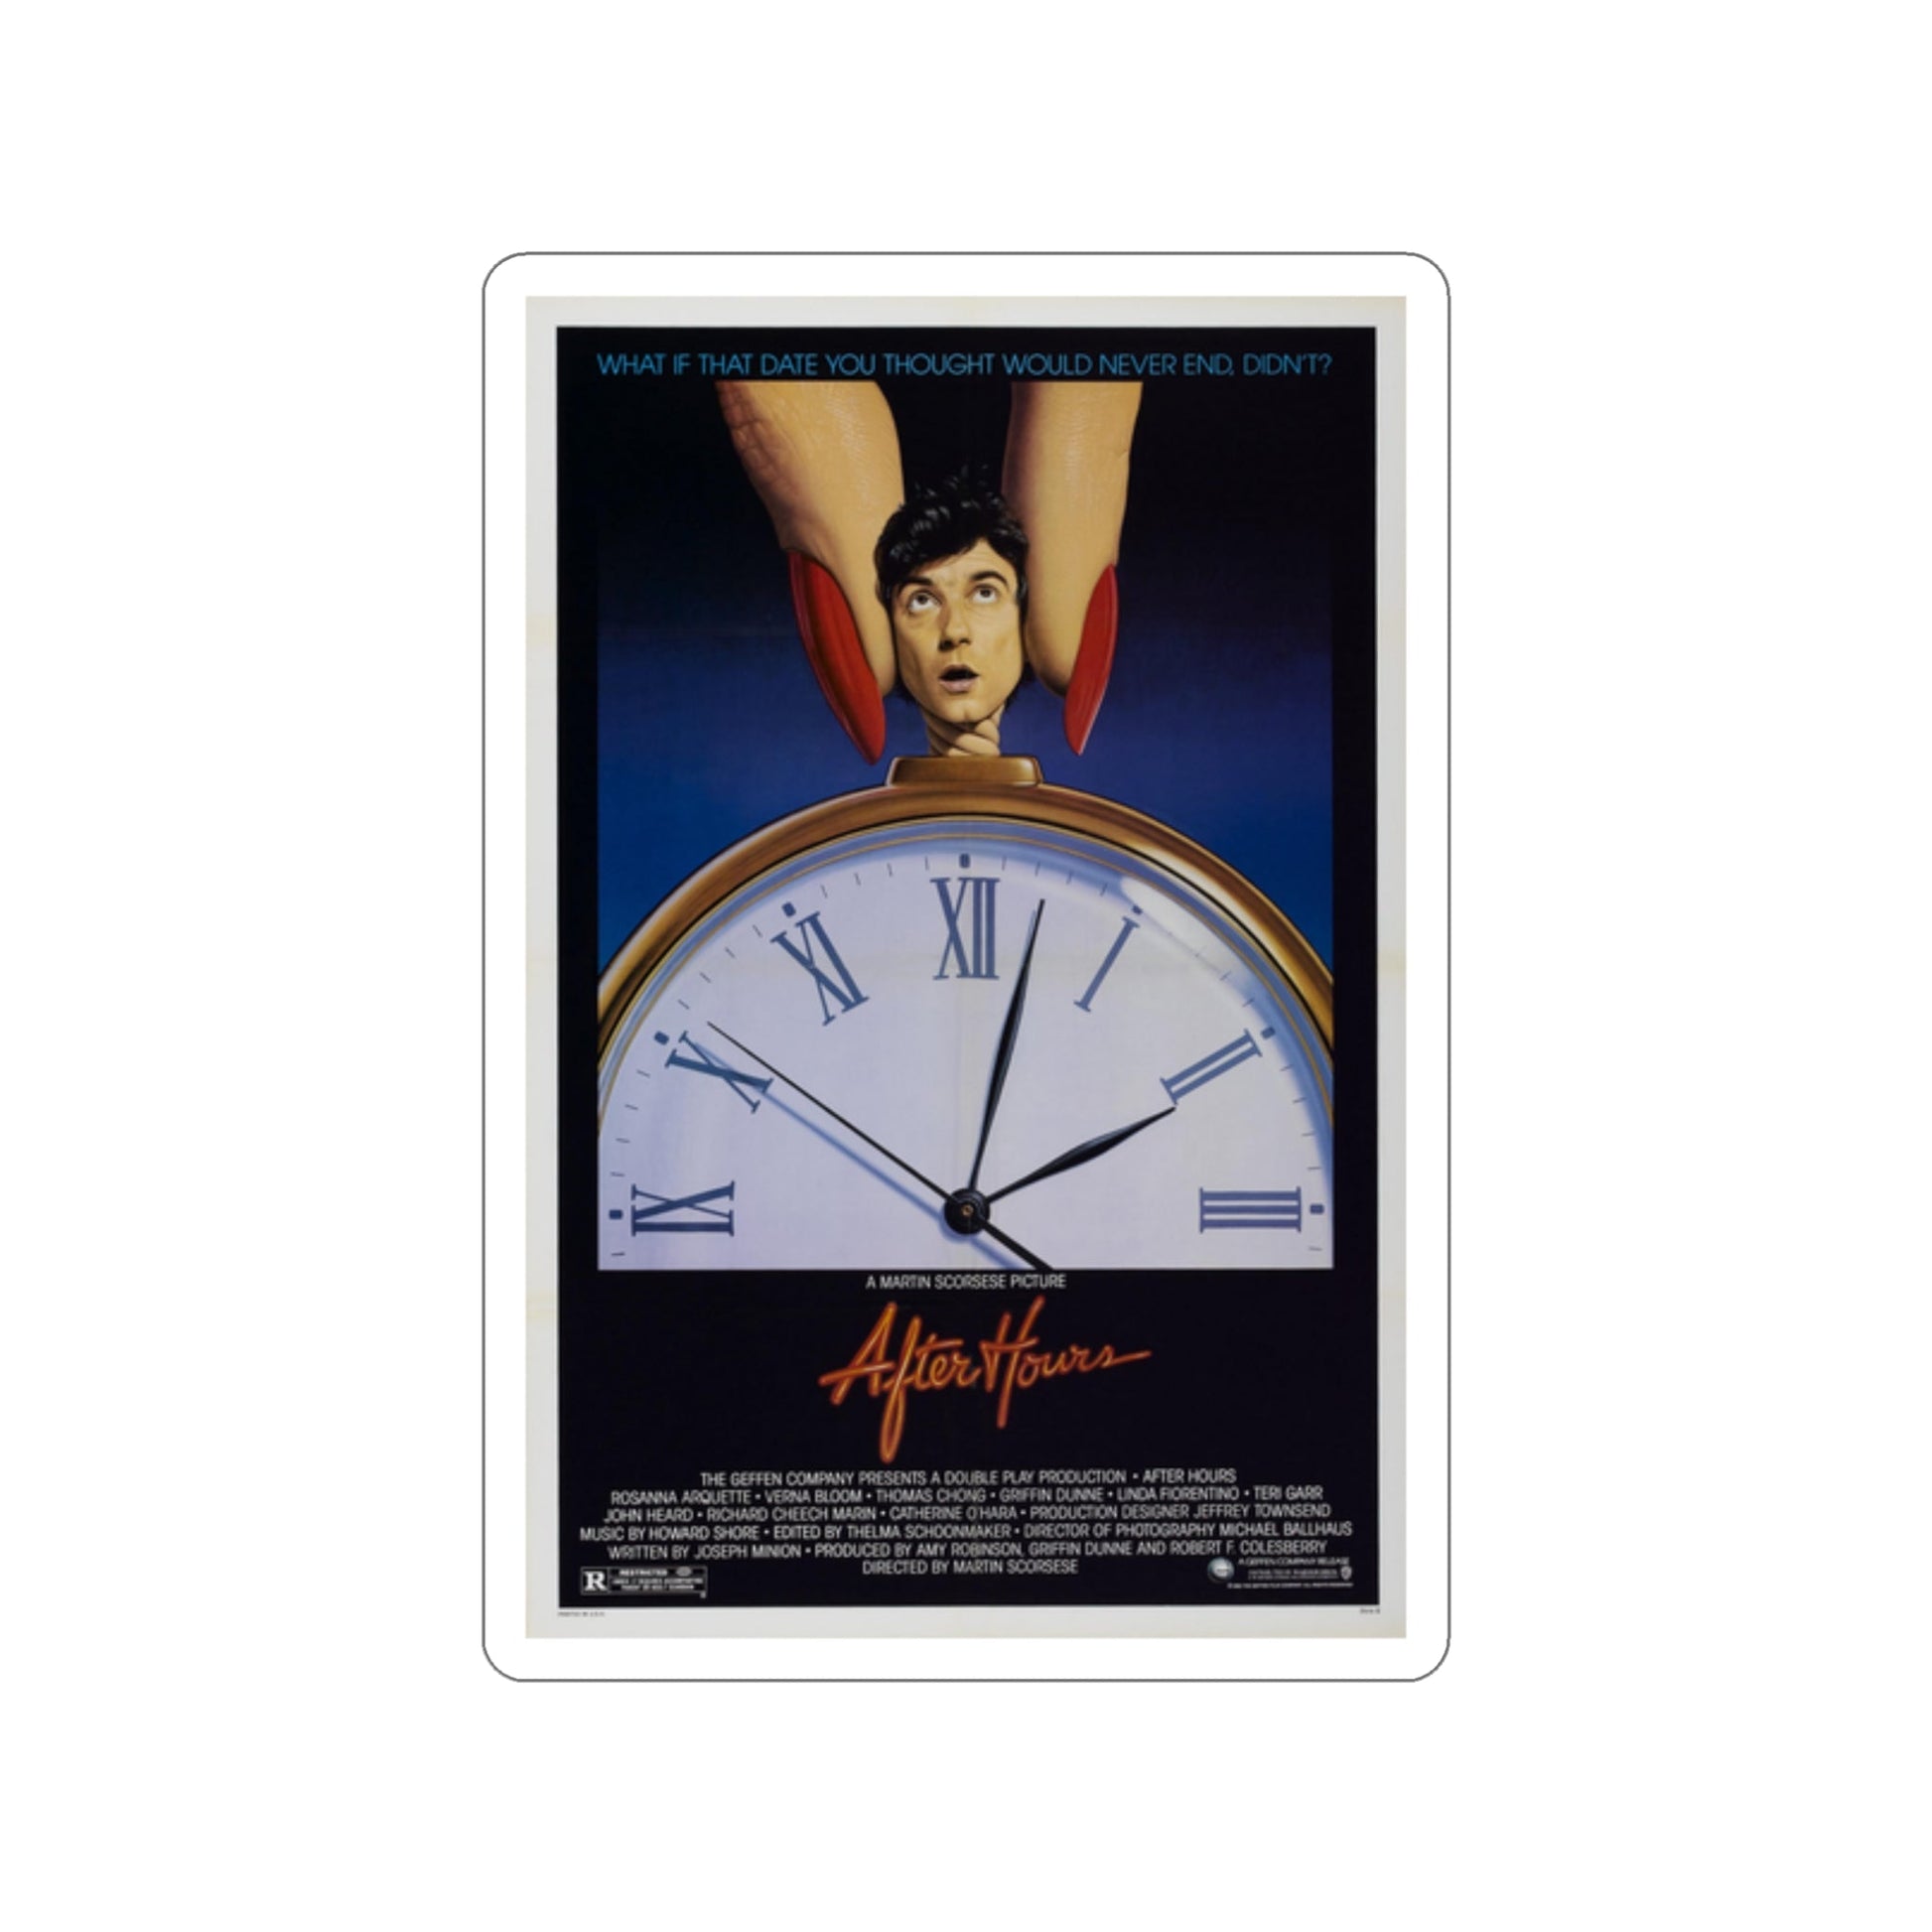 AFTER HOURS 1985 Movie Poster STICKER Vinyl Die-Cut Decal-2 Inch-The Sticker Space